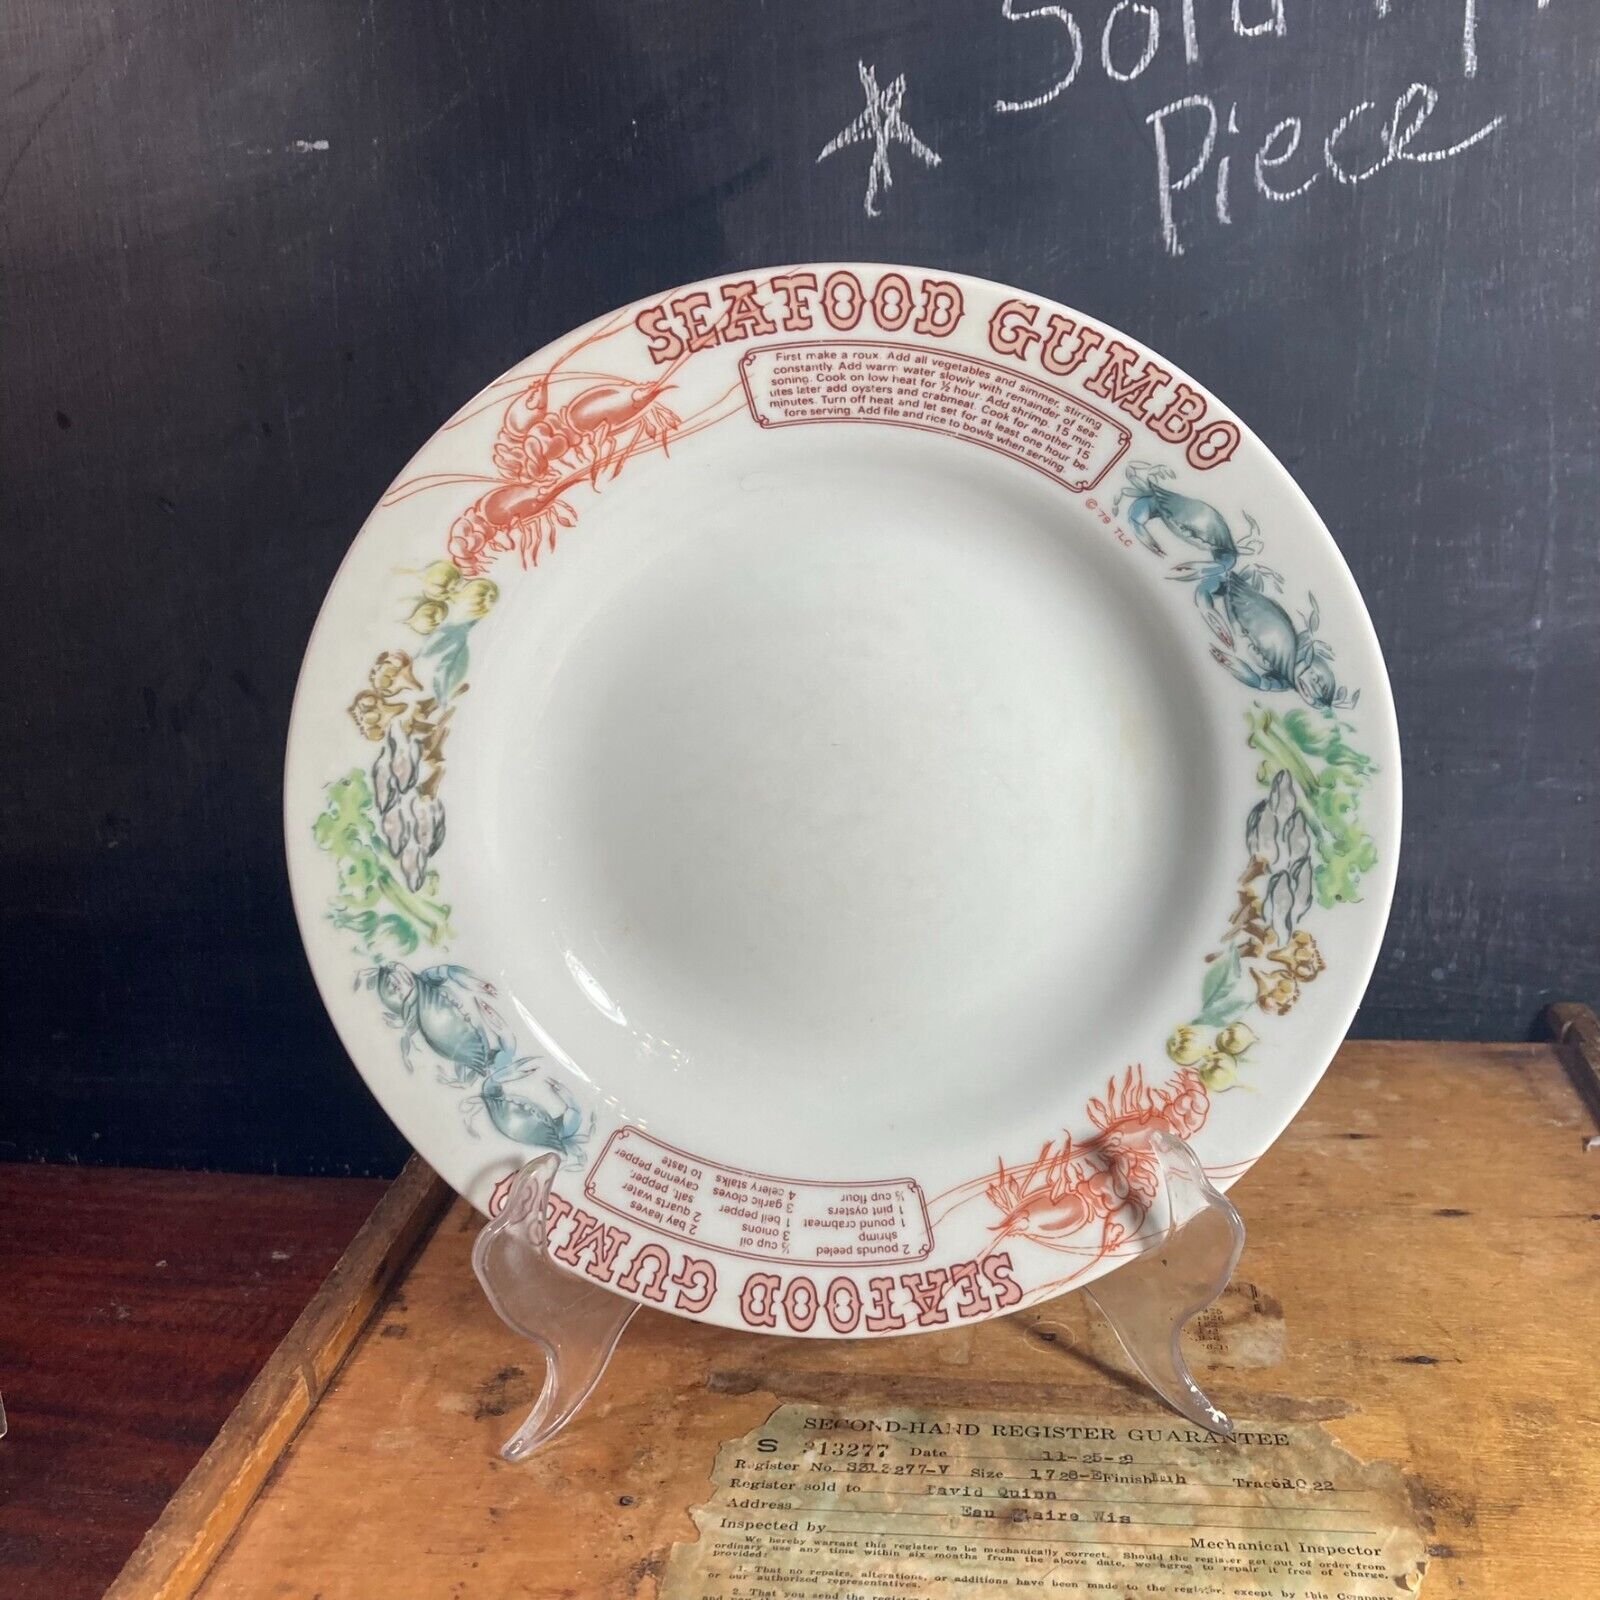 Ljungberg Collection New Orleans Recipe Bowl Sold by Piece, You Pick LJU1